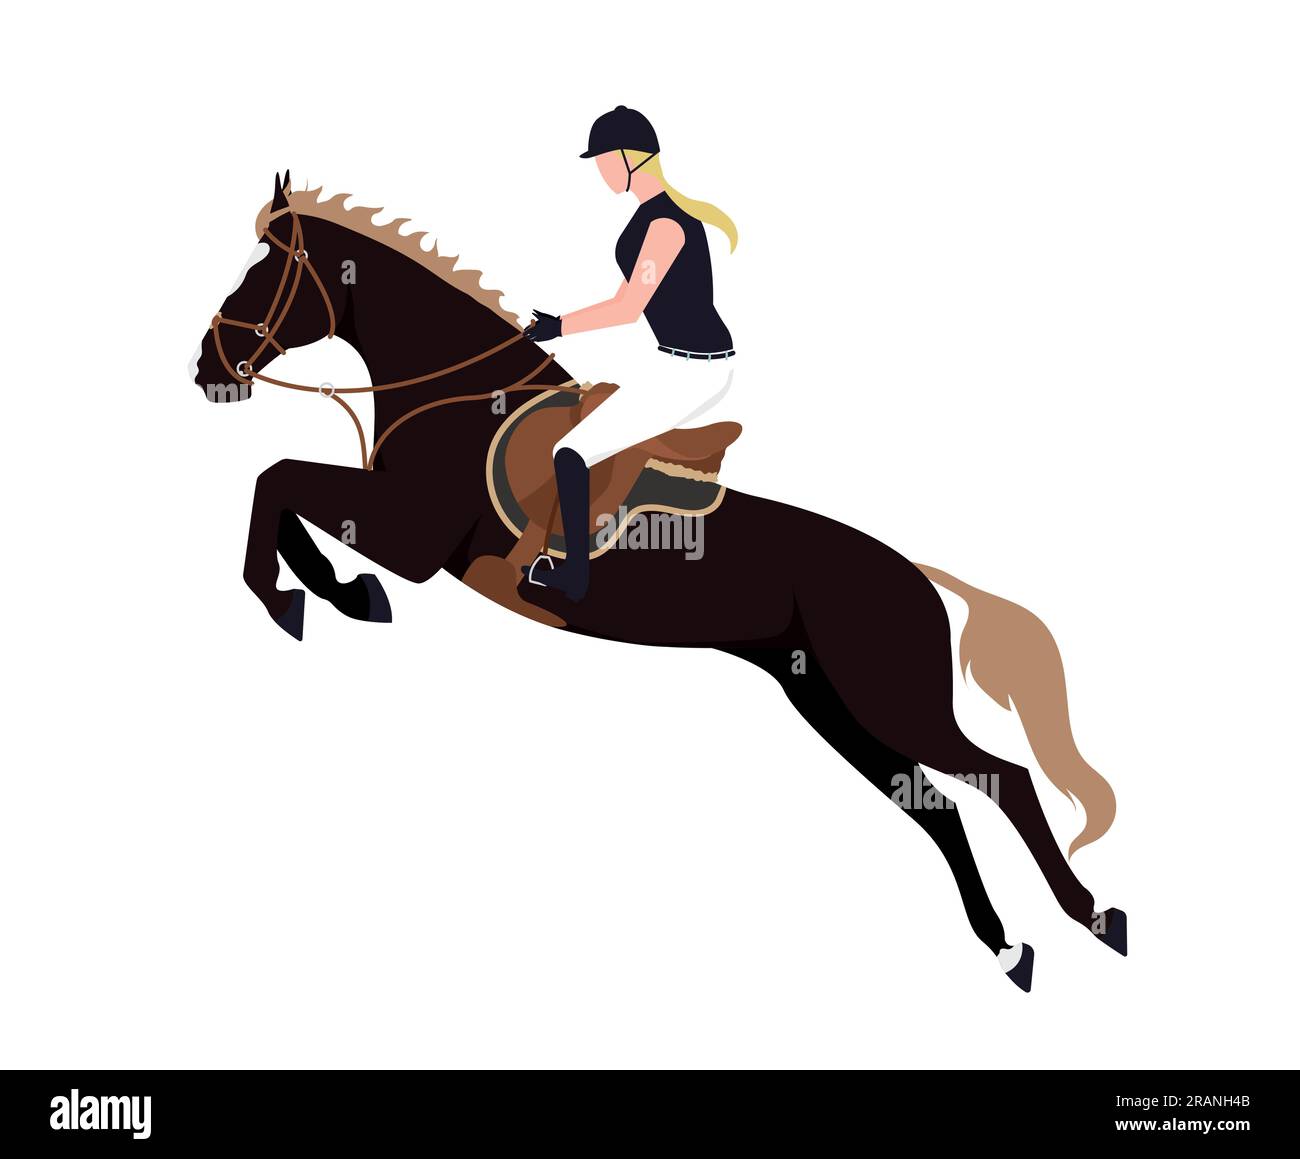 A horsewoman on a horse. Illustration of a girl riding a bouncing horse. Illustration of a woman riding a stallion Stock Vector